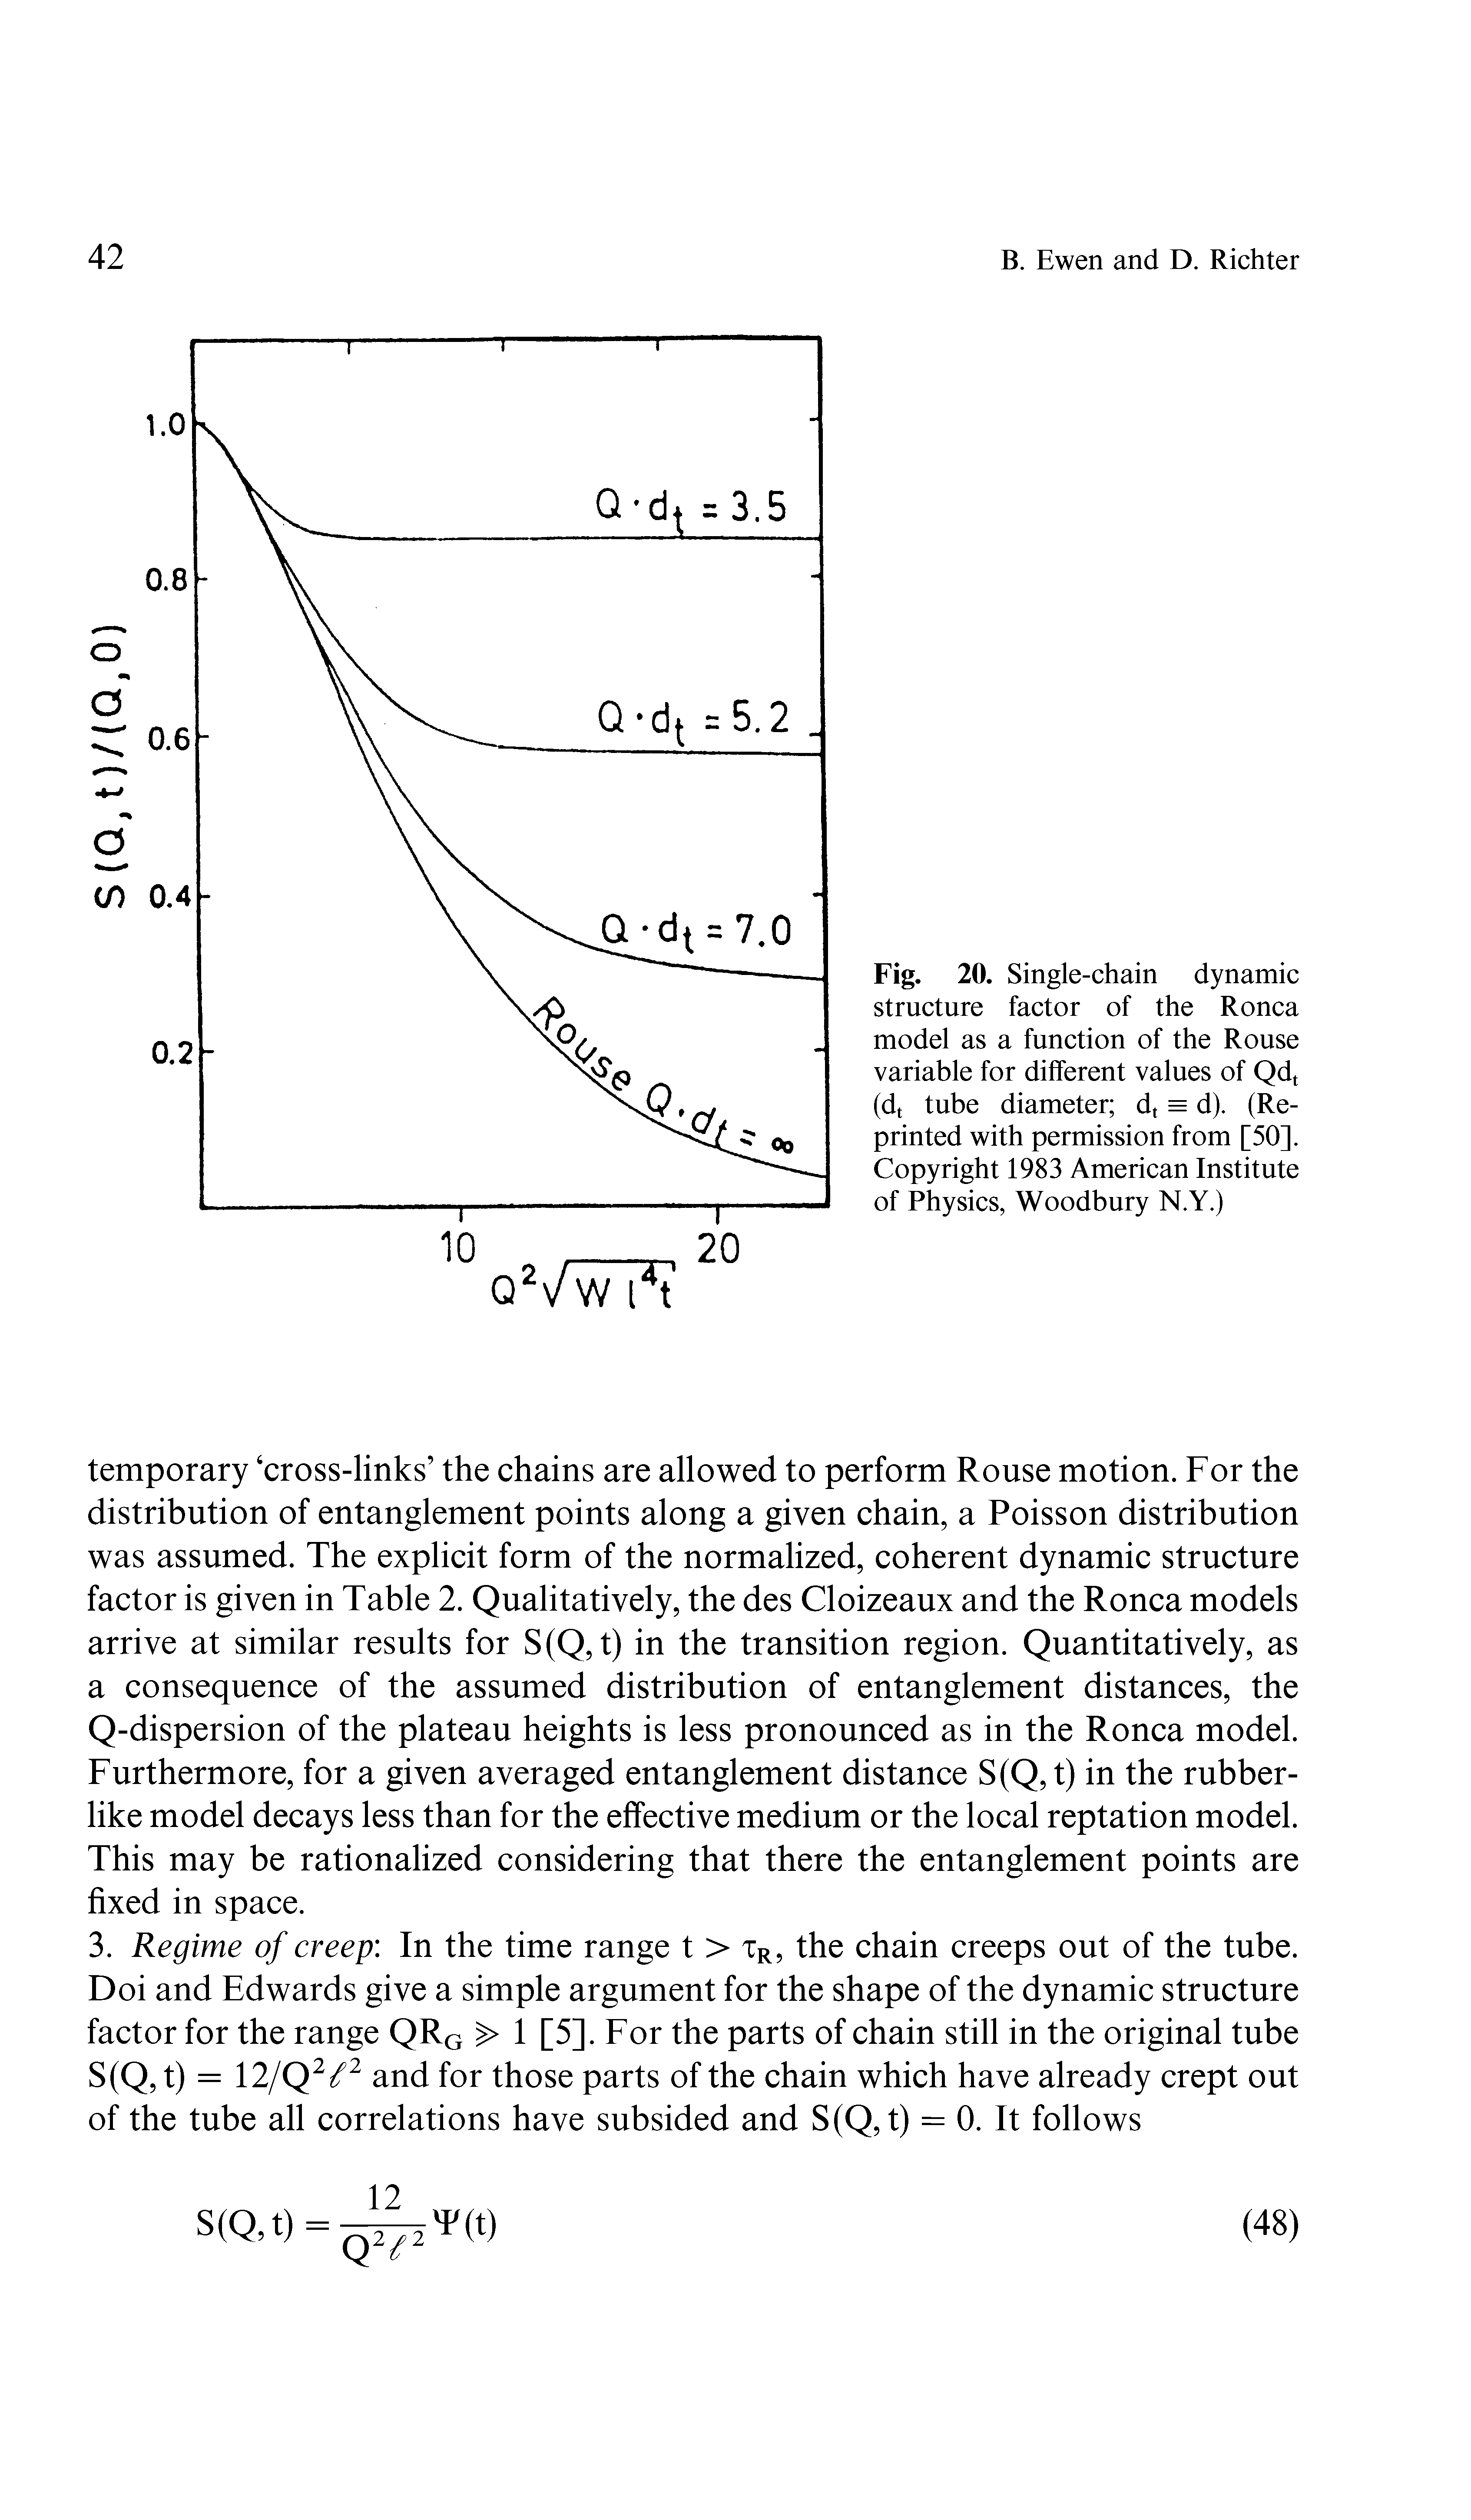 Fig. 20. Single-chain dynamic structure factor of the Ronca model as a function of the Rouse variable for different values of Qdt (dt tube diameter dt = d). (Reprinted with permission from [50]. Copyright 1983 American Institute of Physics, Woodbury N.Y.)...